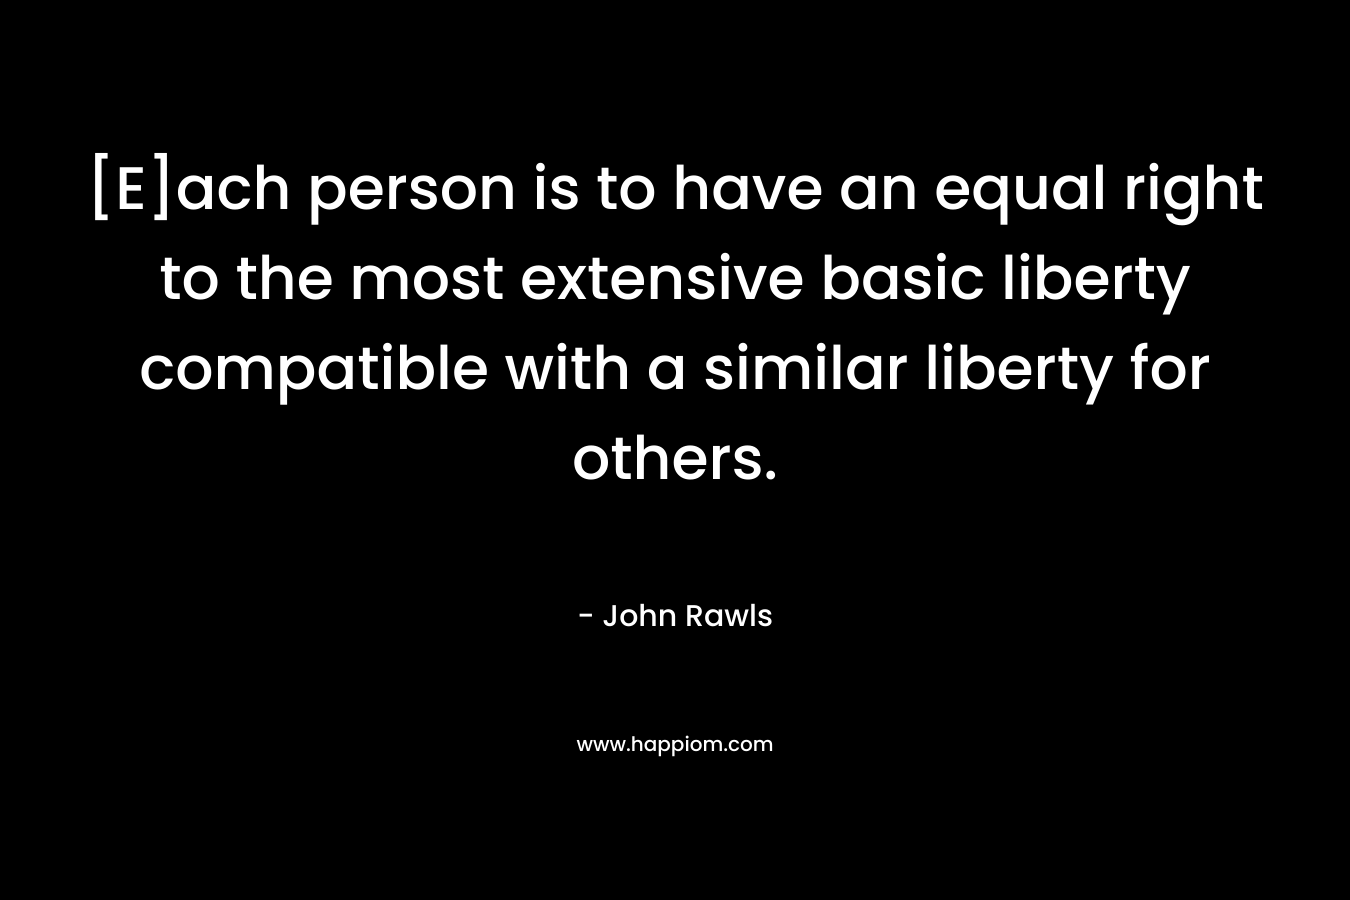 [E]ach person is to have an equal right to the most extensive basic liberty compatible with a similar liberty for others. – John Rawls